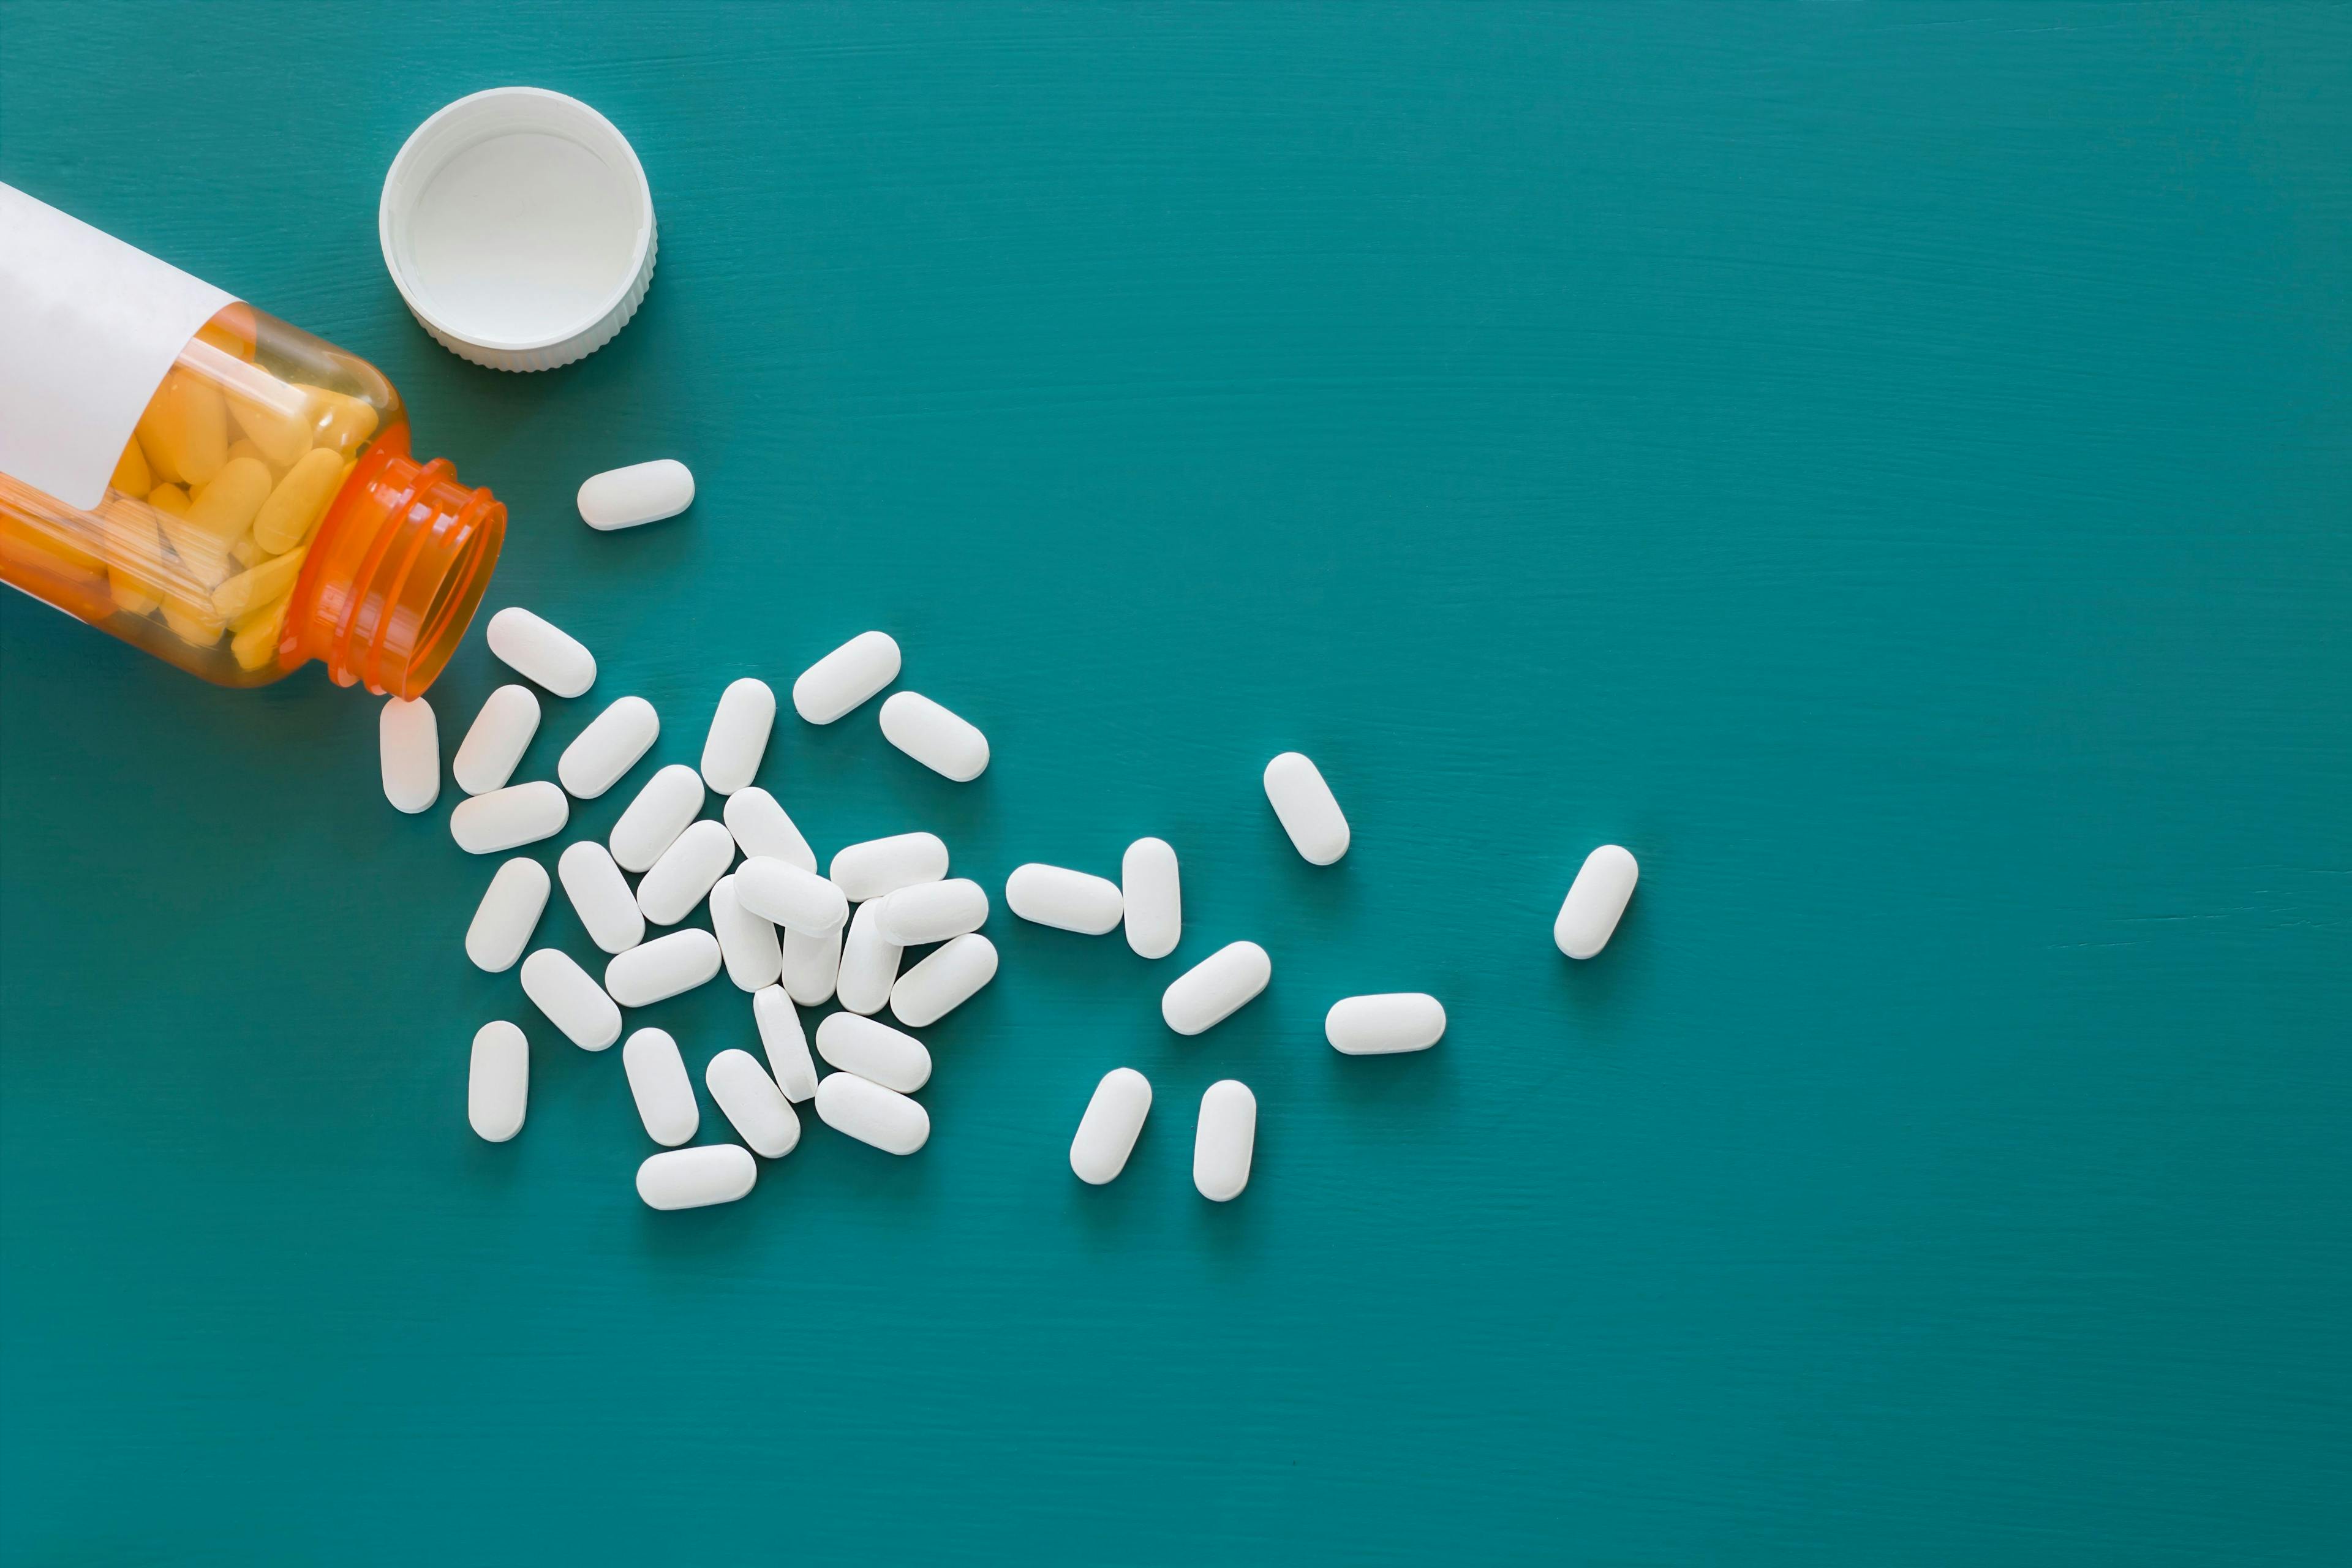 White Pills on a Teal Background | Image Credit: © SawBear Photography - stock.adobe.com.